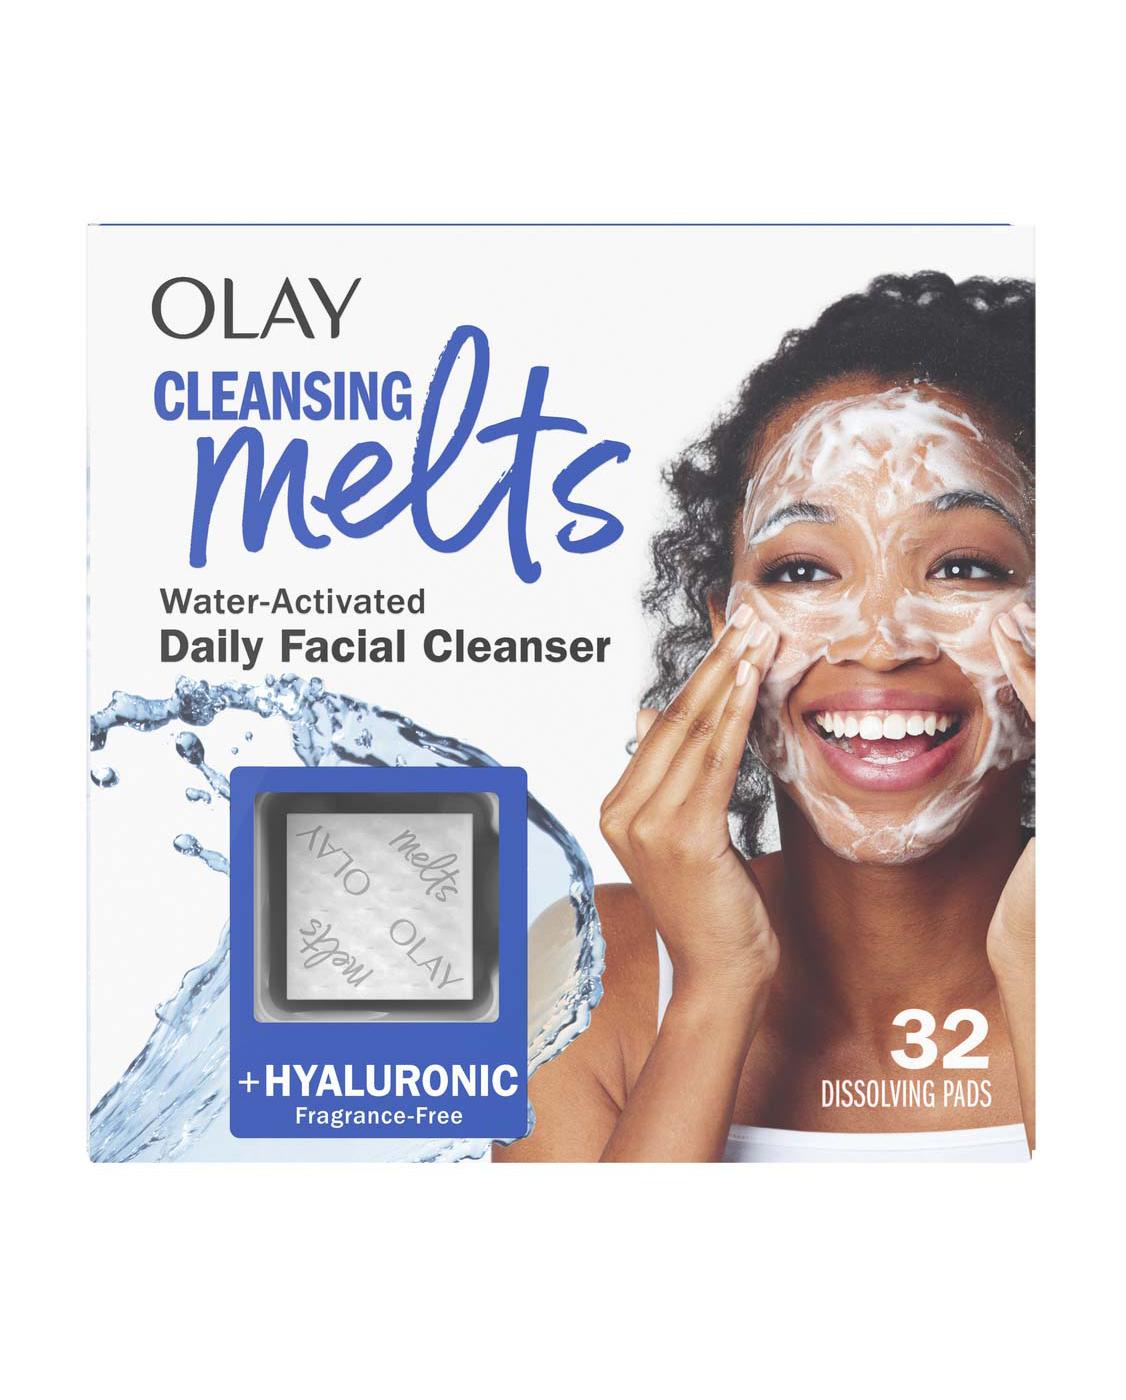 Olay Cleansing Melts +Hyaluronic Daily Facial Cleanser; image 1 of 3